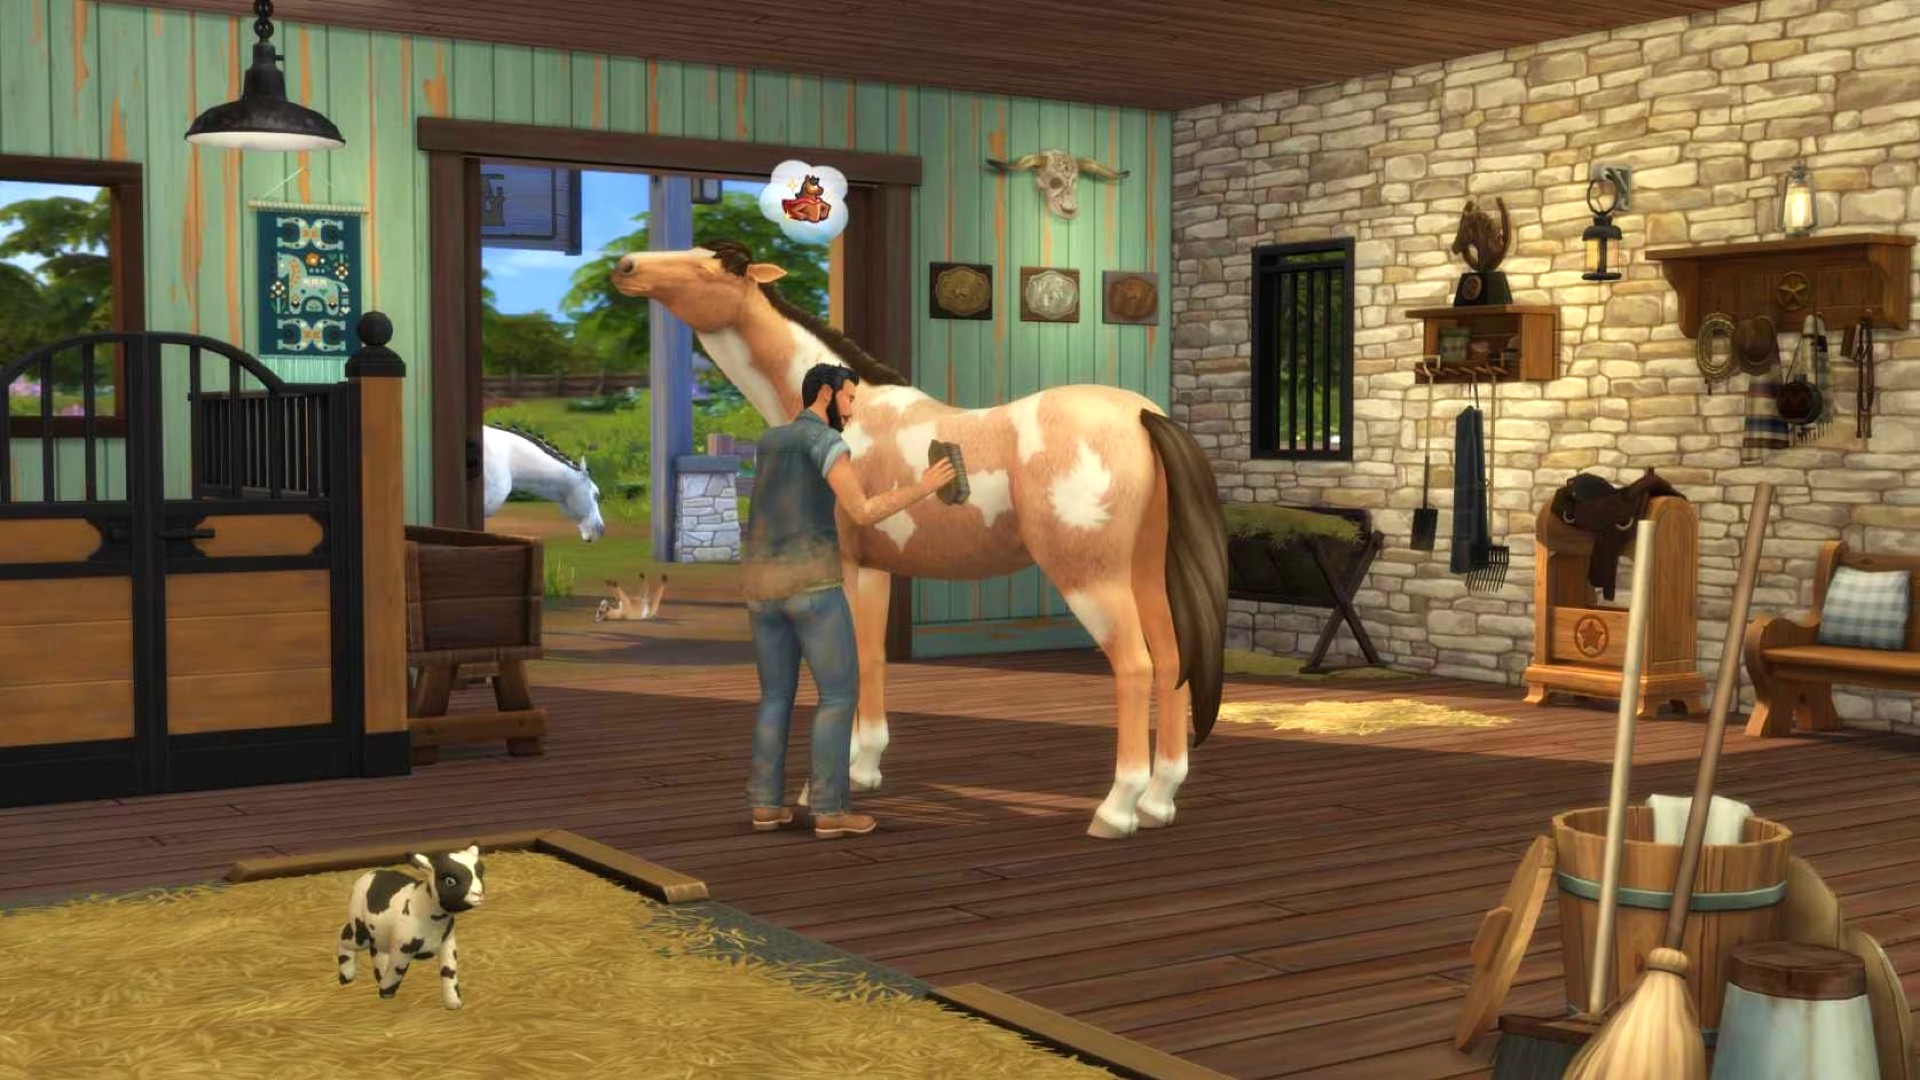 The Sims 4 cheats: every cheat code for easy money, building